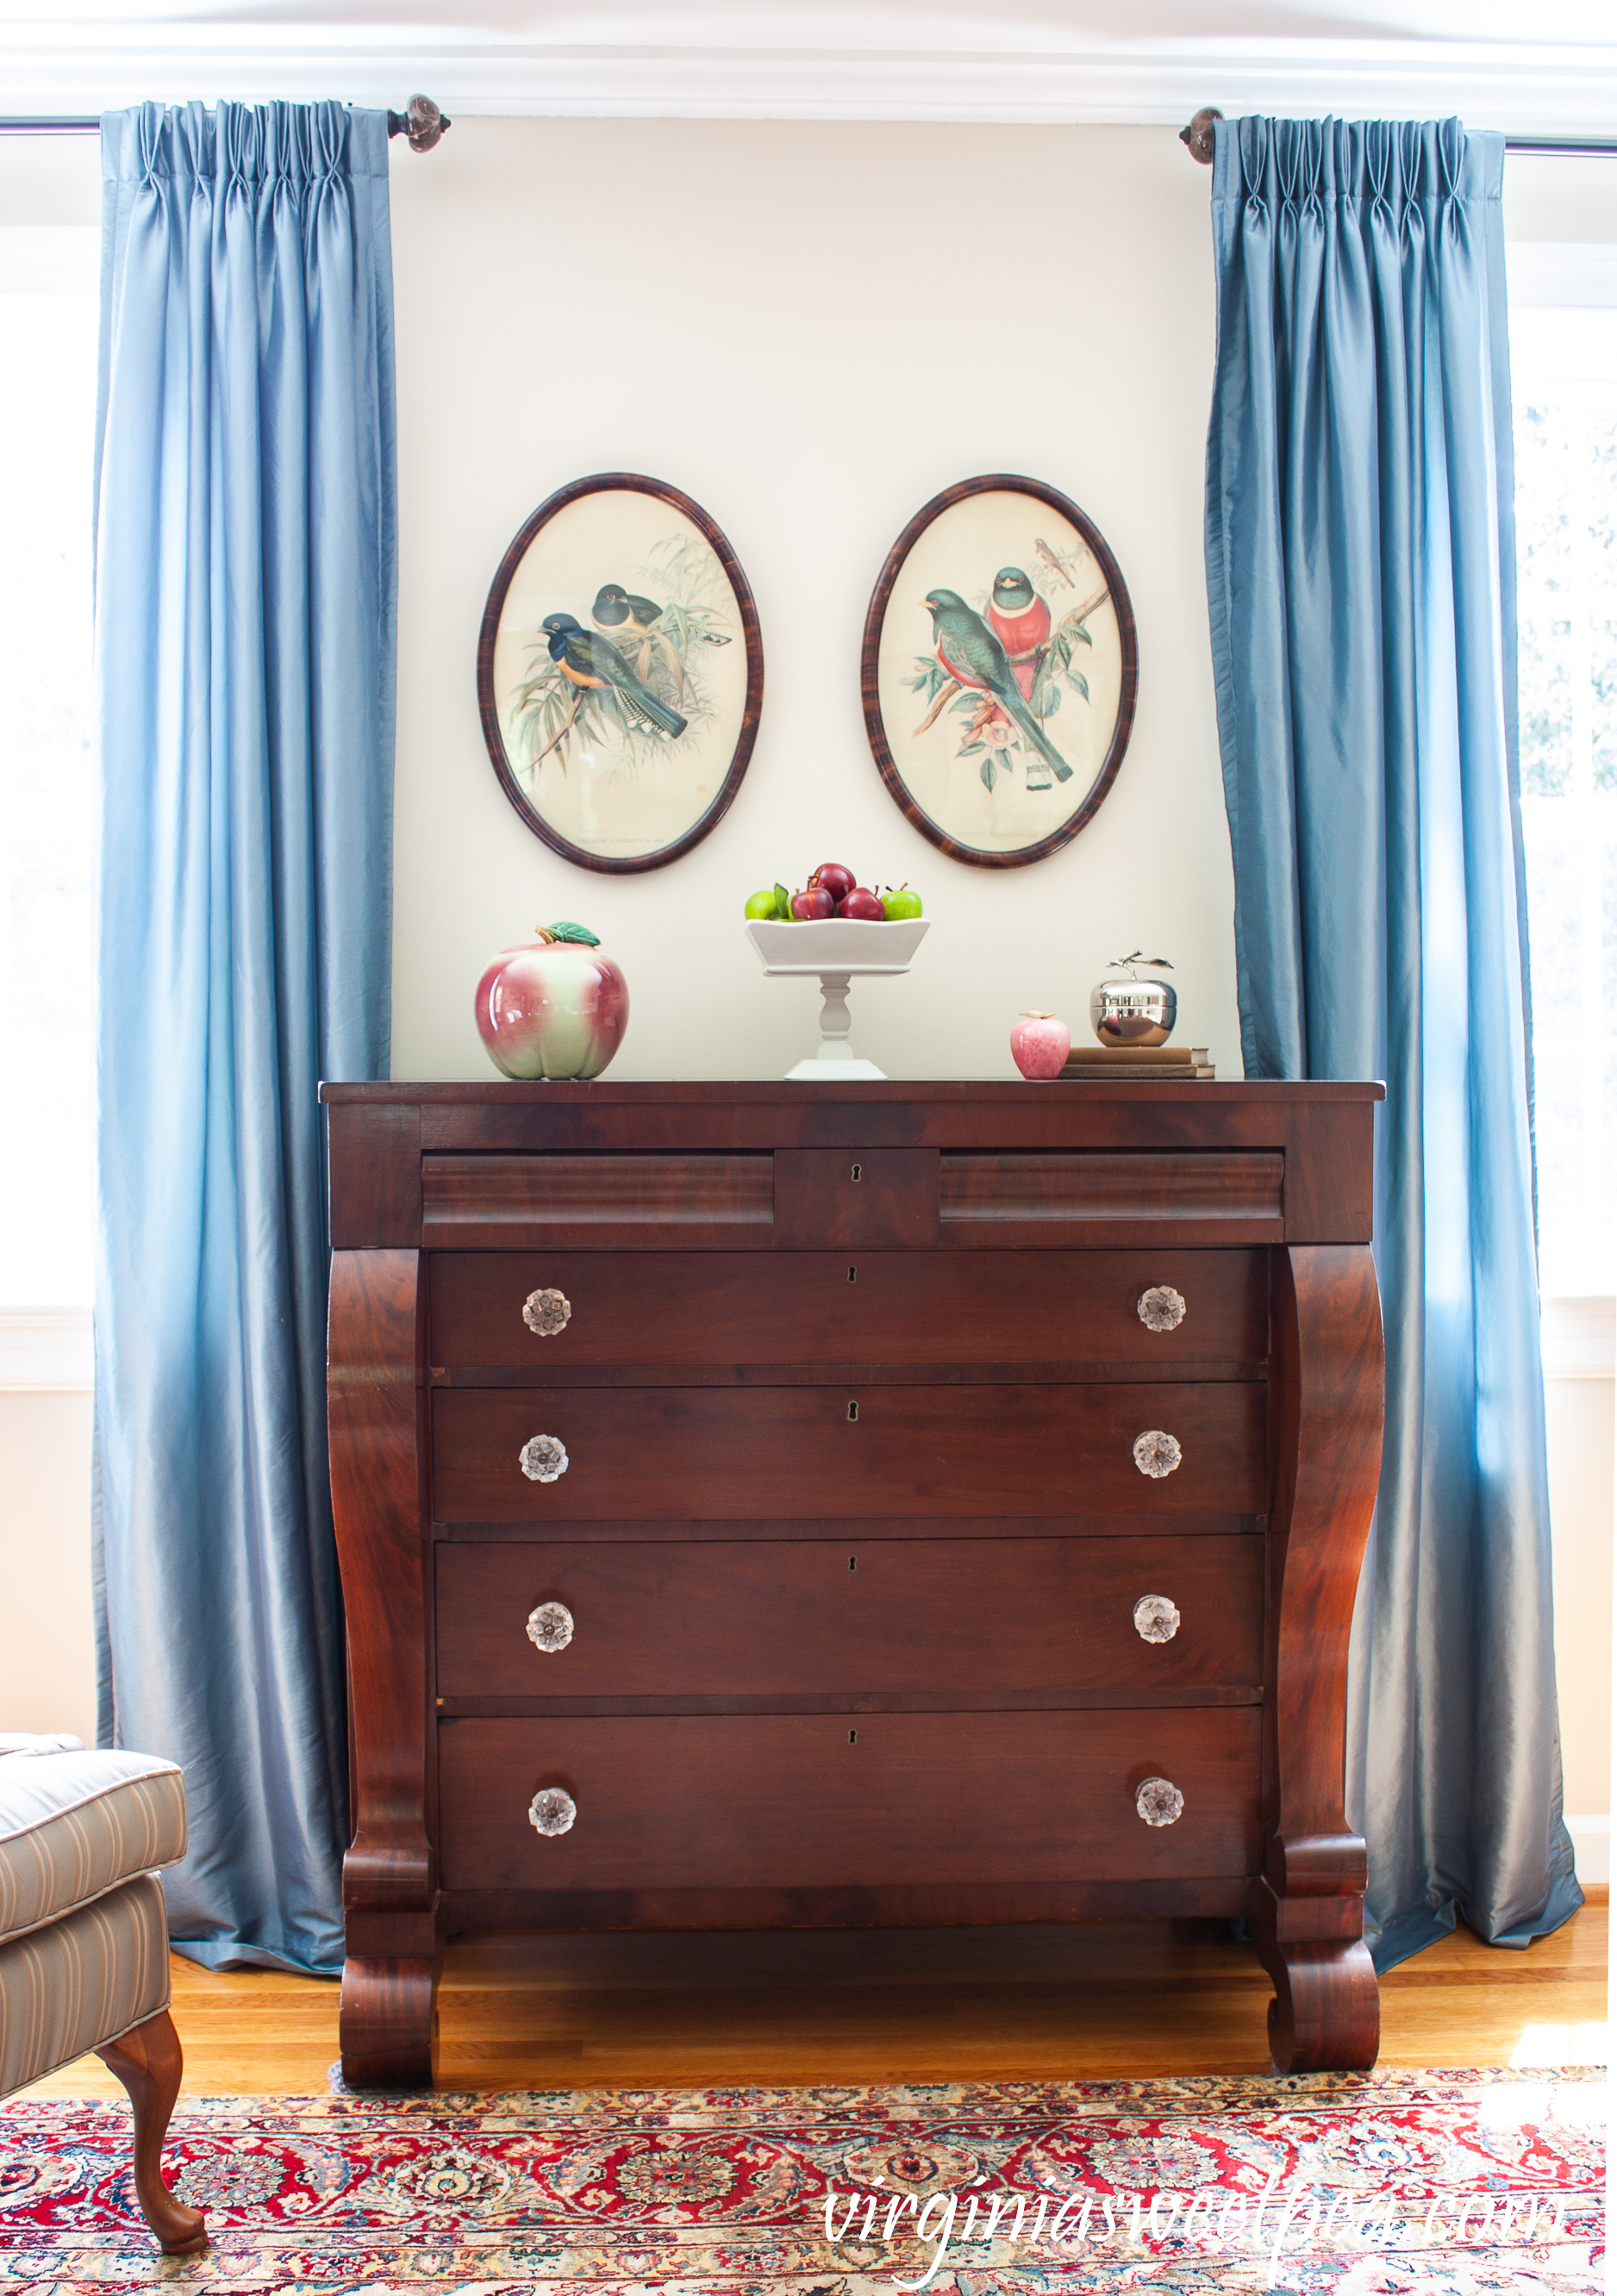 Antique chest decorated with an apple theme for early fall